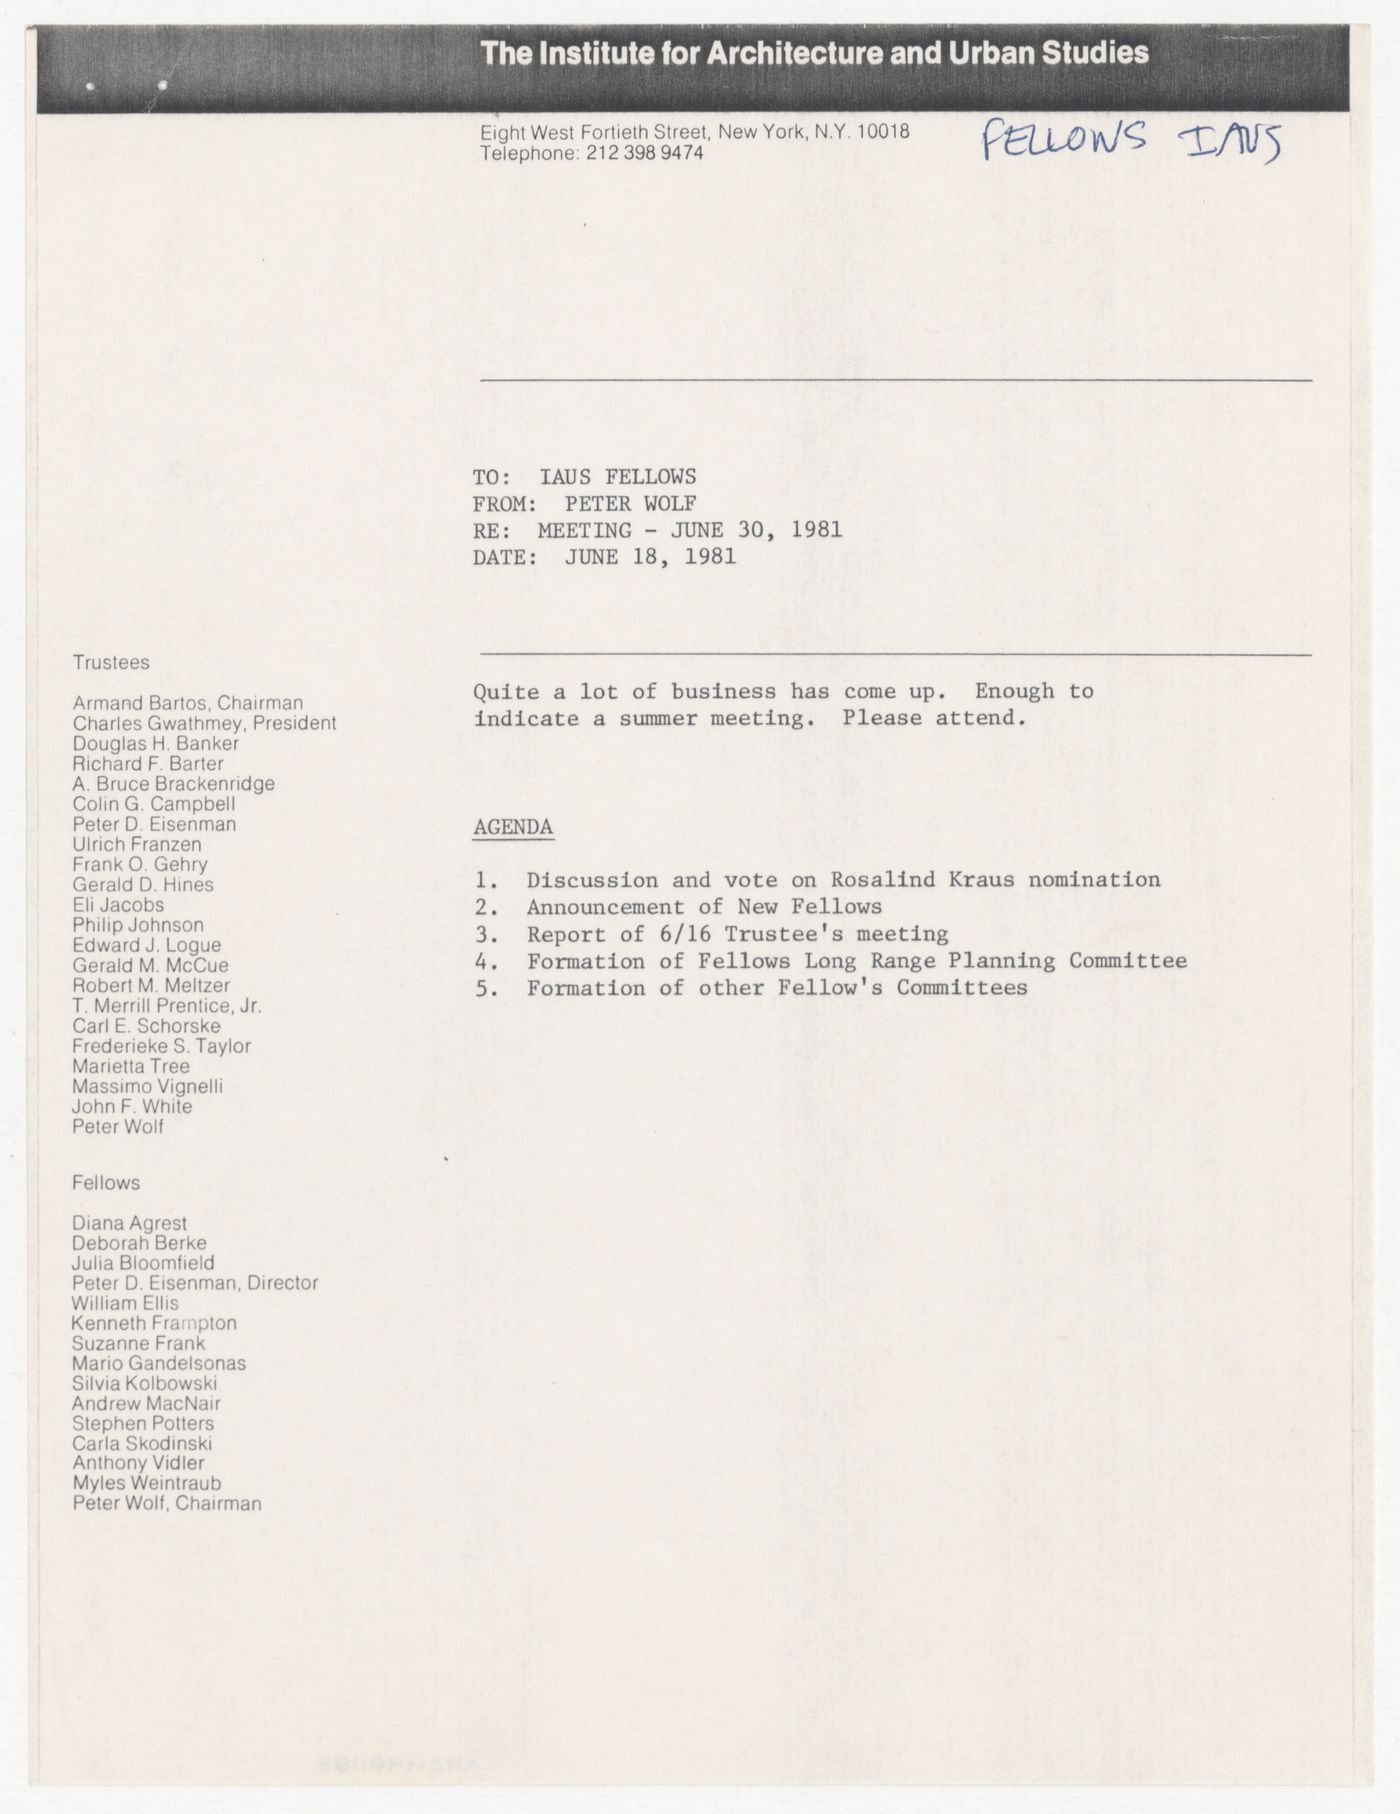 Memorandum from Peter Wolf to the Fellows about a summer meeting on June 30th 1981 with meeting agenda